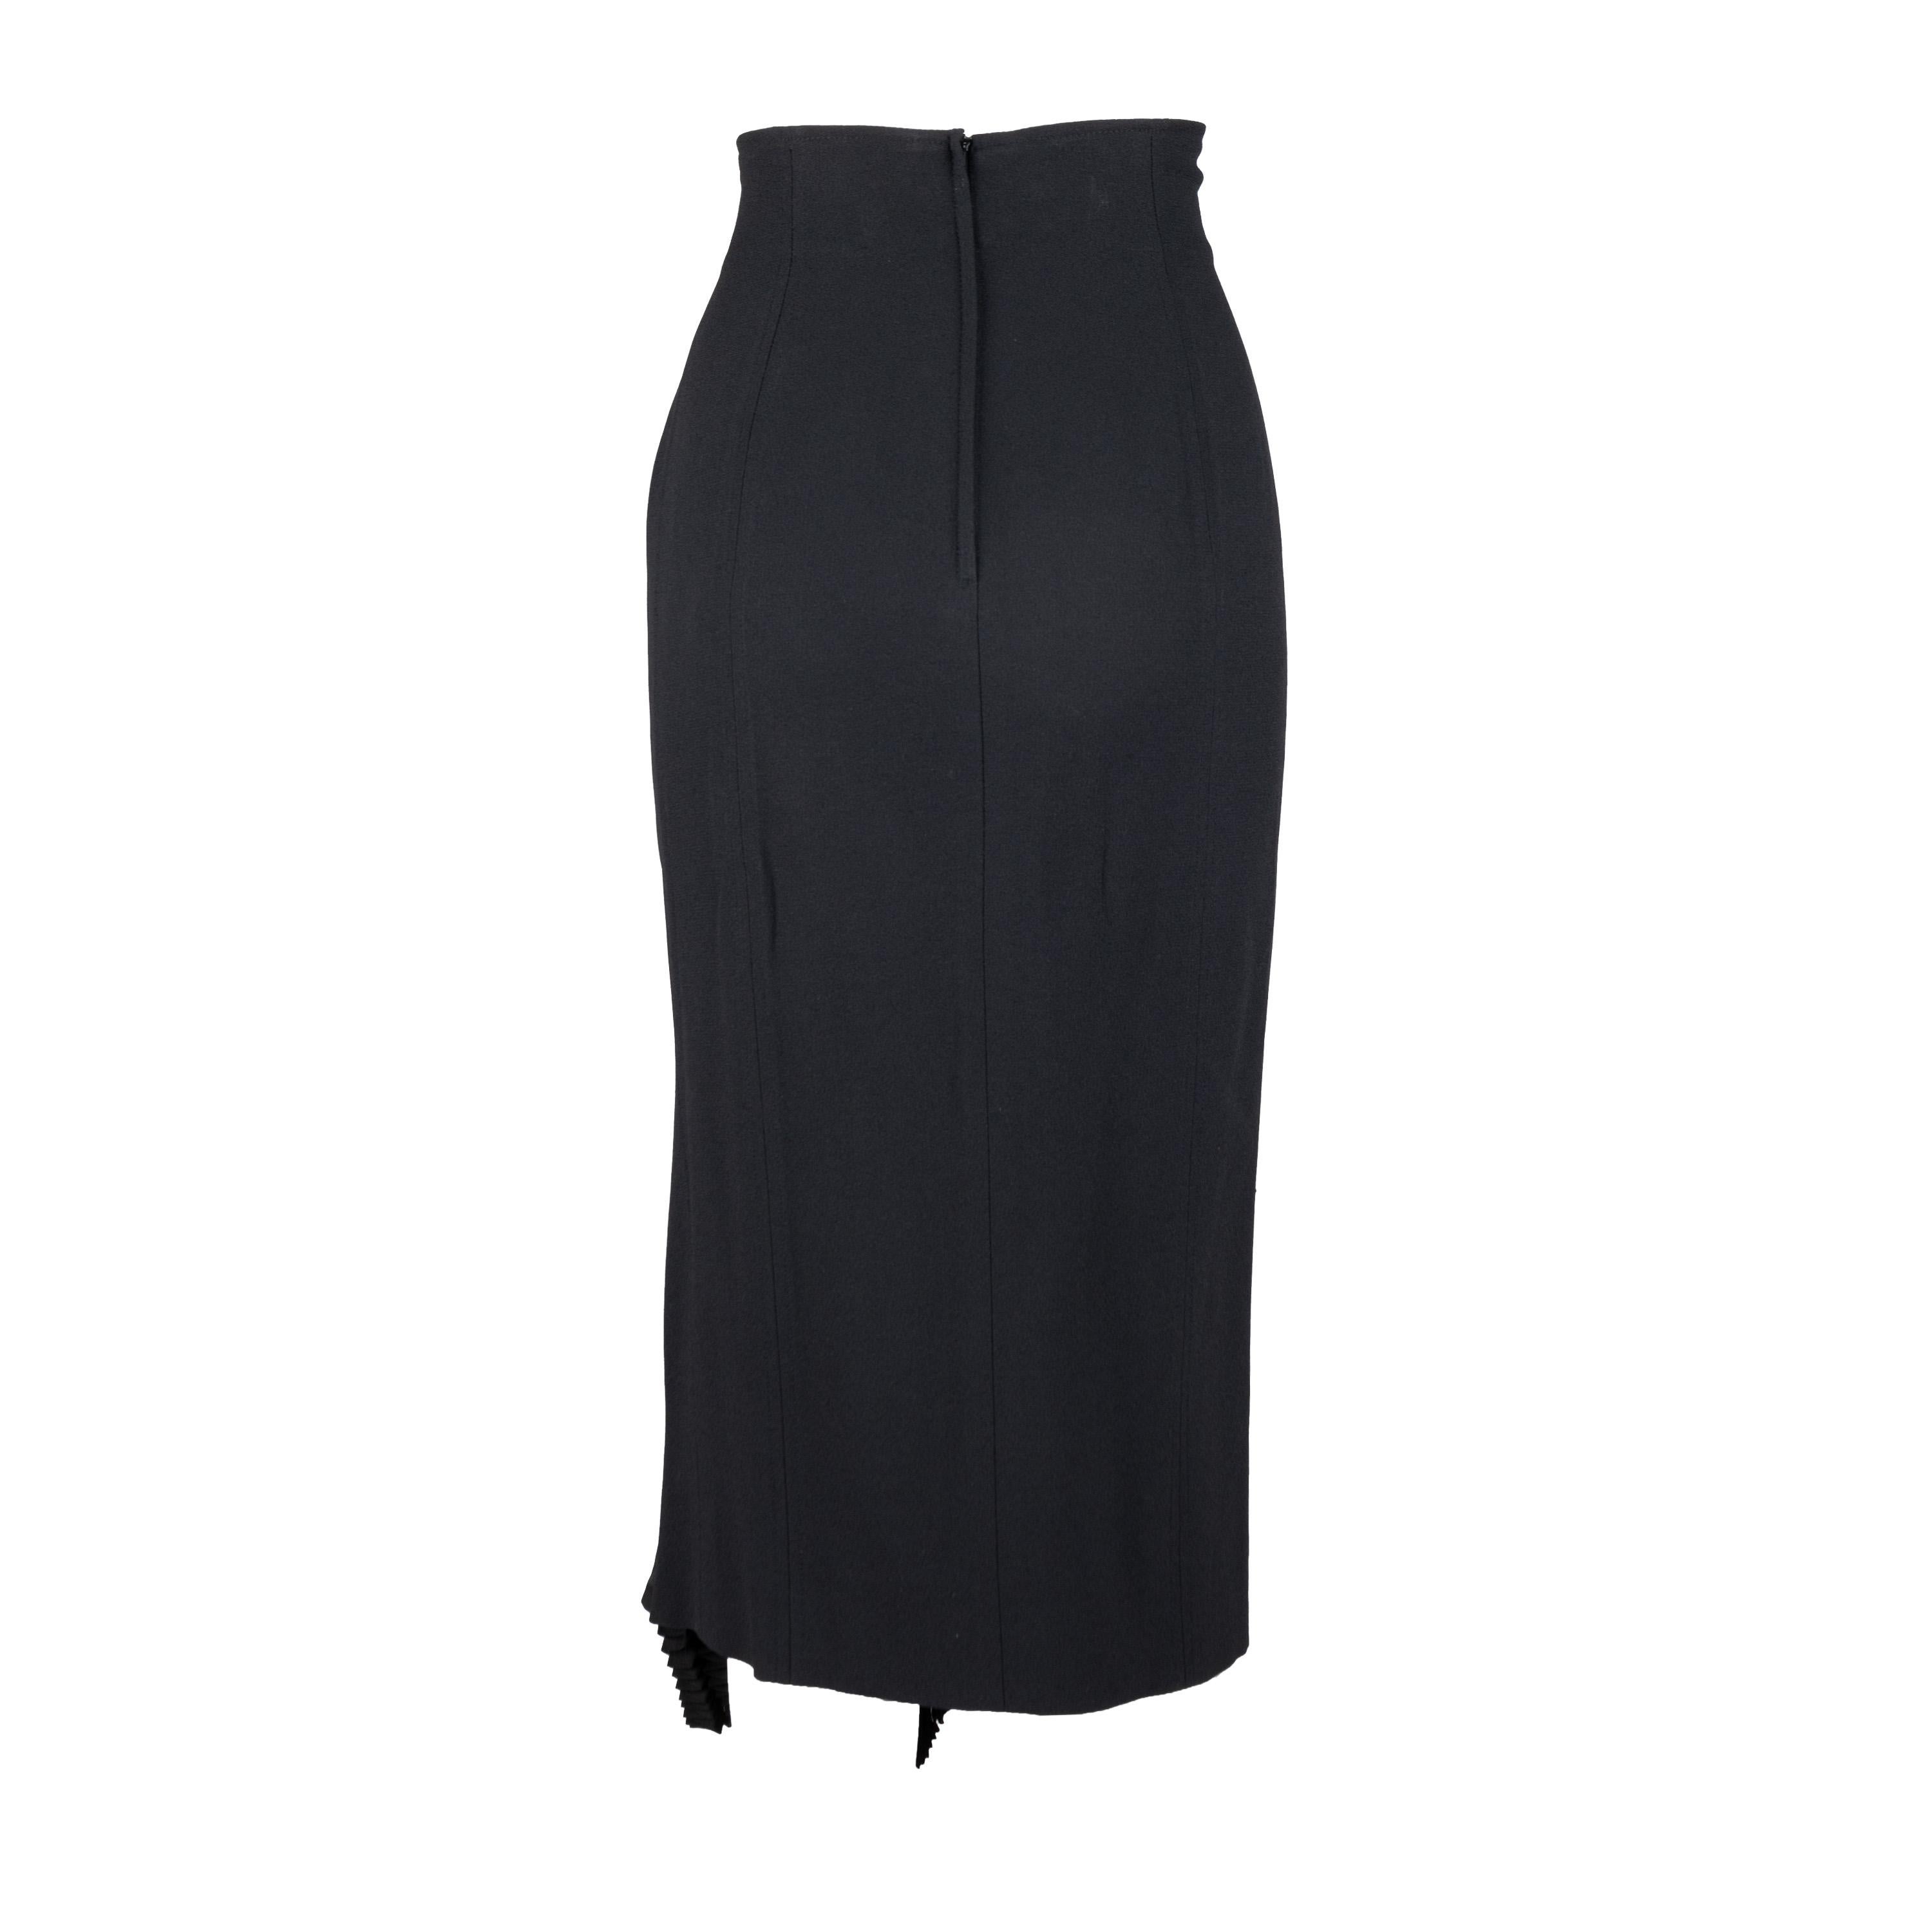 This one-of-a-kind Christian Dior skirt is crafted from a luxurious viscose blend in a timeless black hue. Its sleek and fitted silhouette features a high-waisted design with a discreet back zipper. The defining feature is the accordion pleat